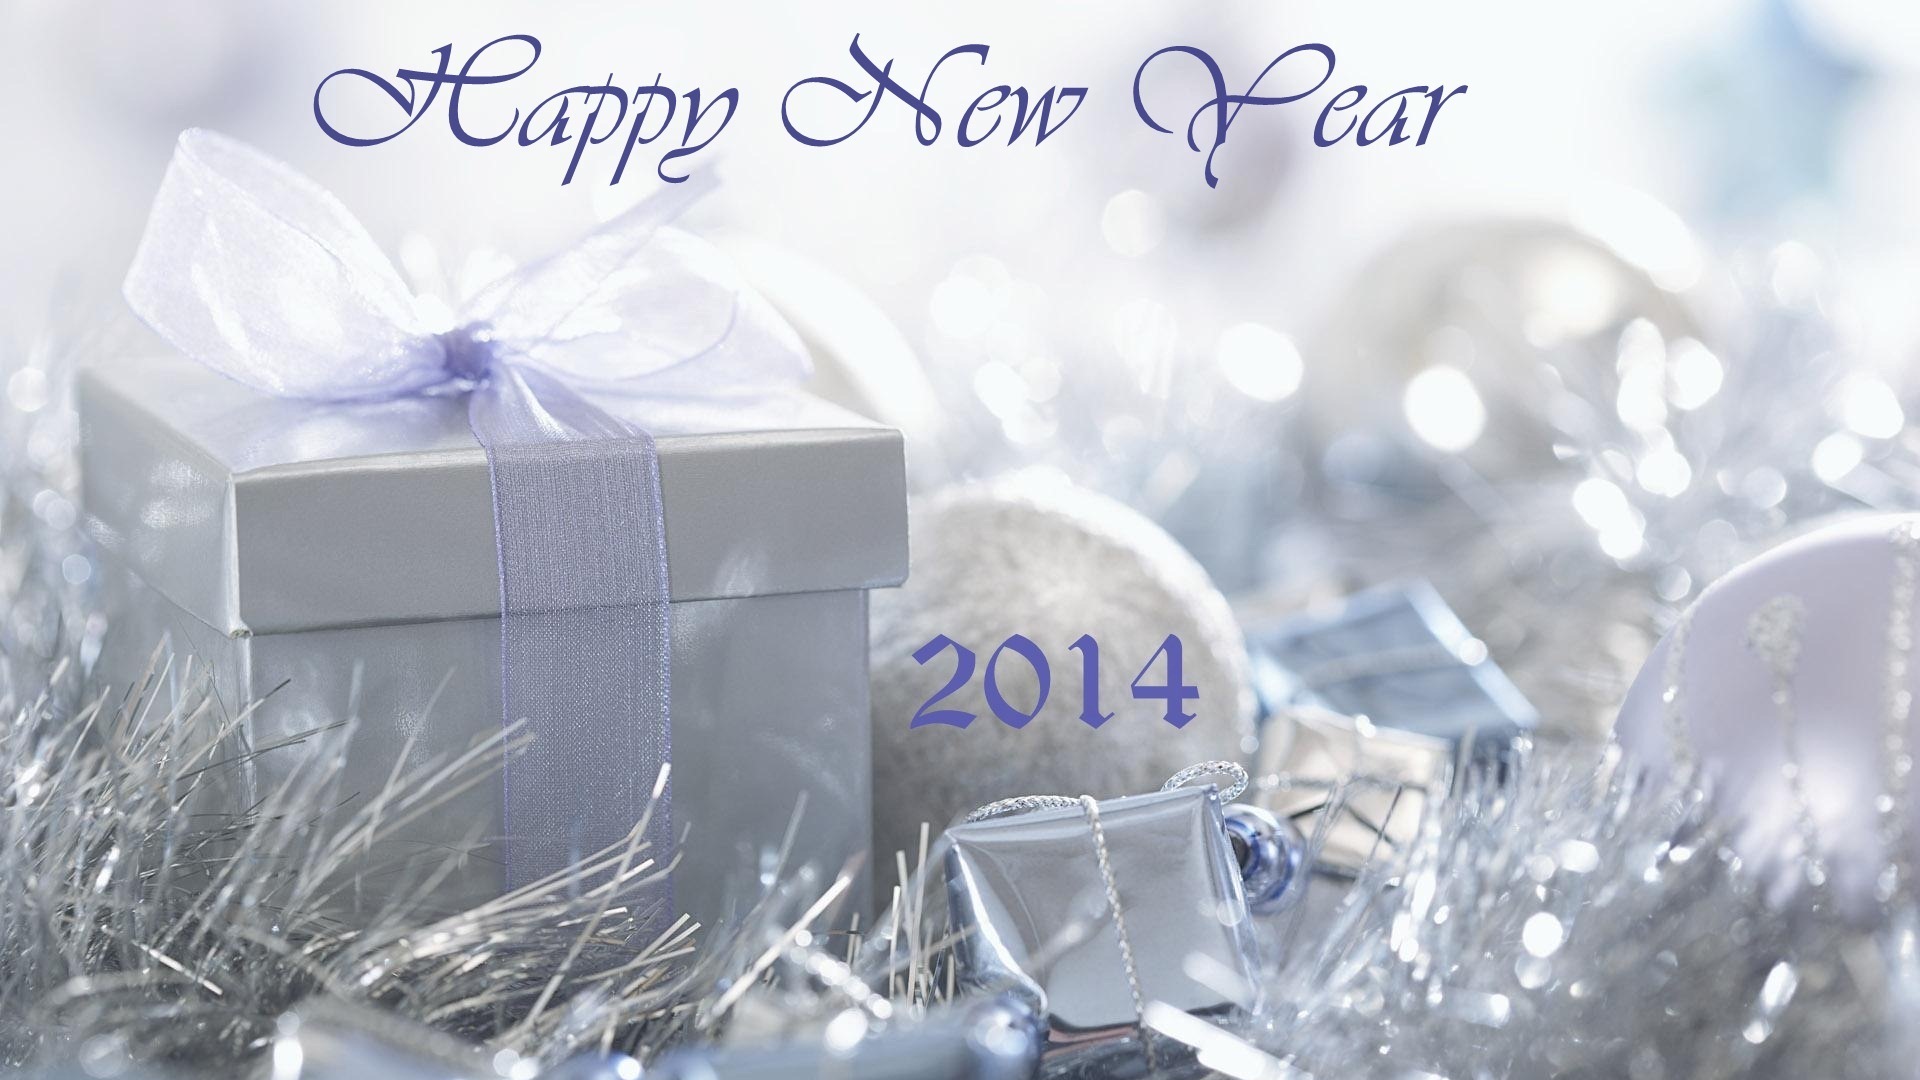 2014 New Year Theme HD Wallpapers (2) #11 - 1920x1080